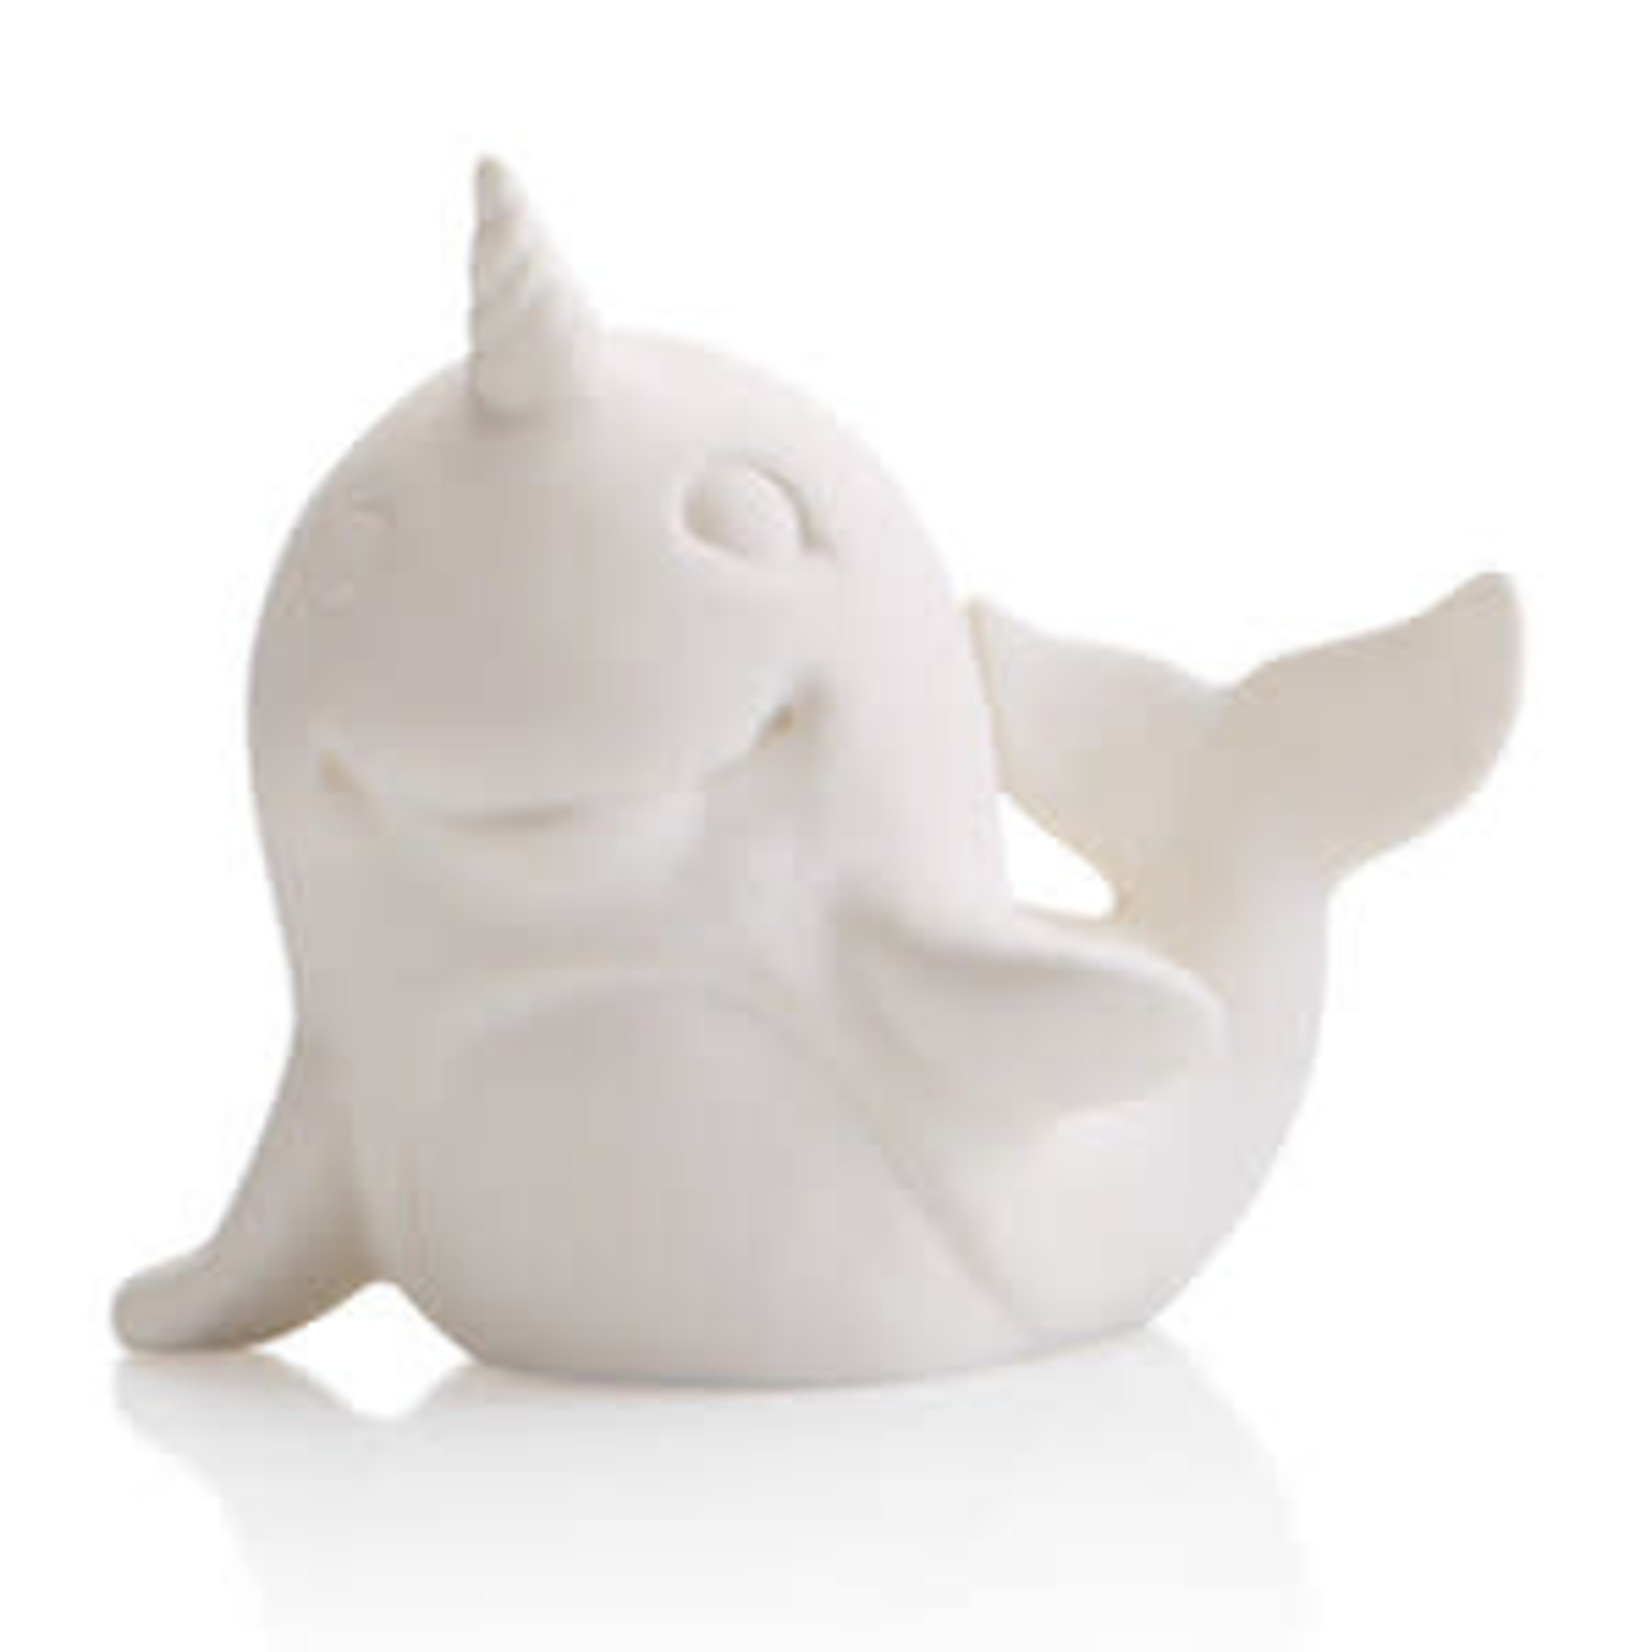 Narwhal Party Animal - 3.75H x 4L